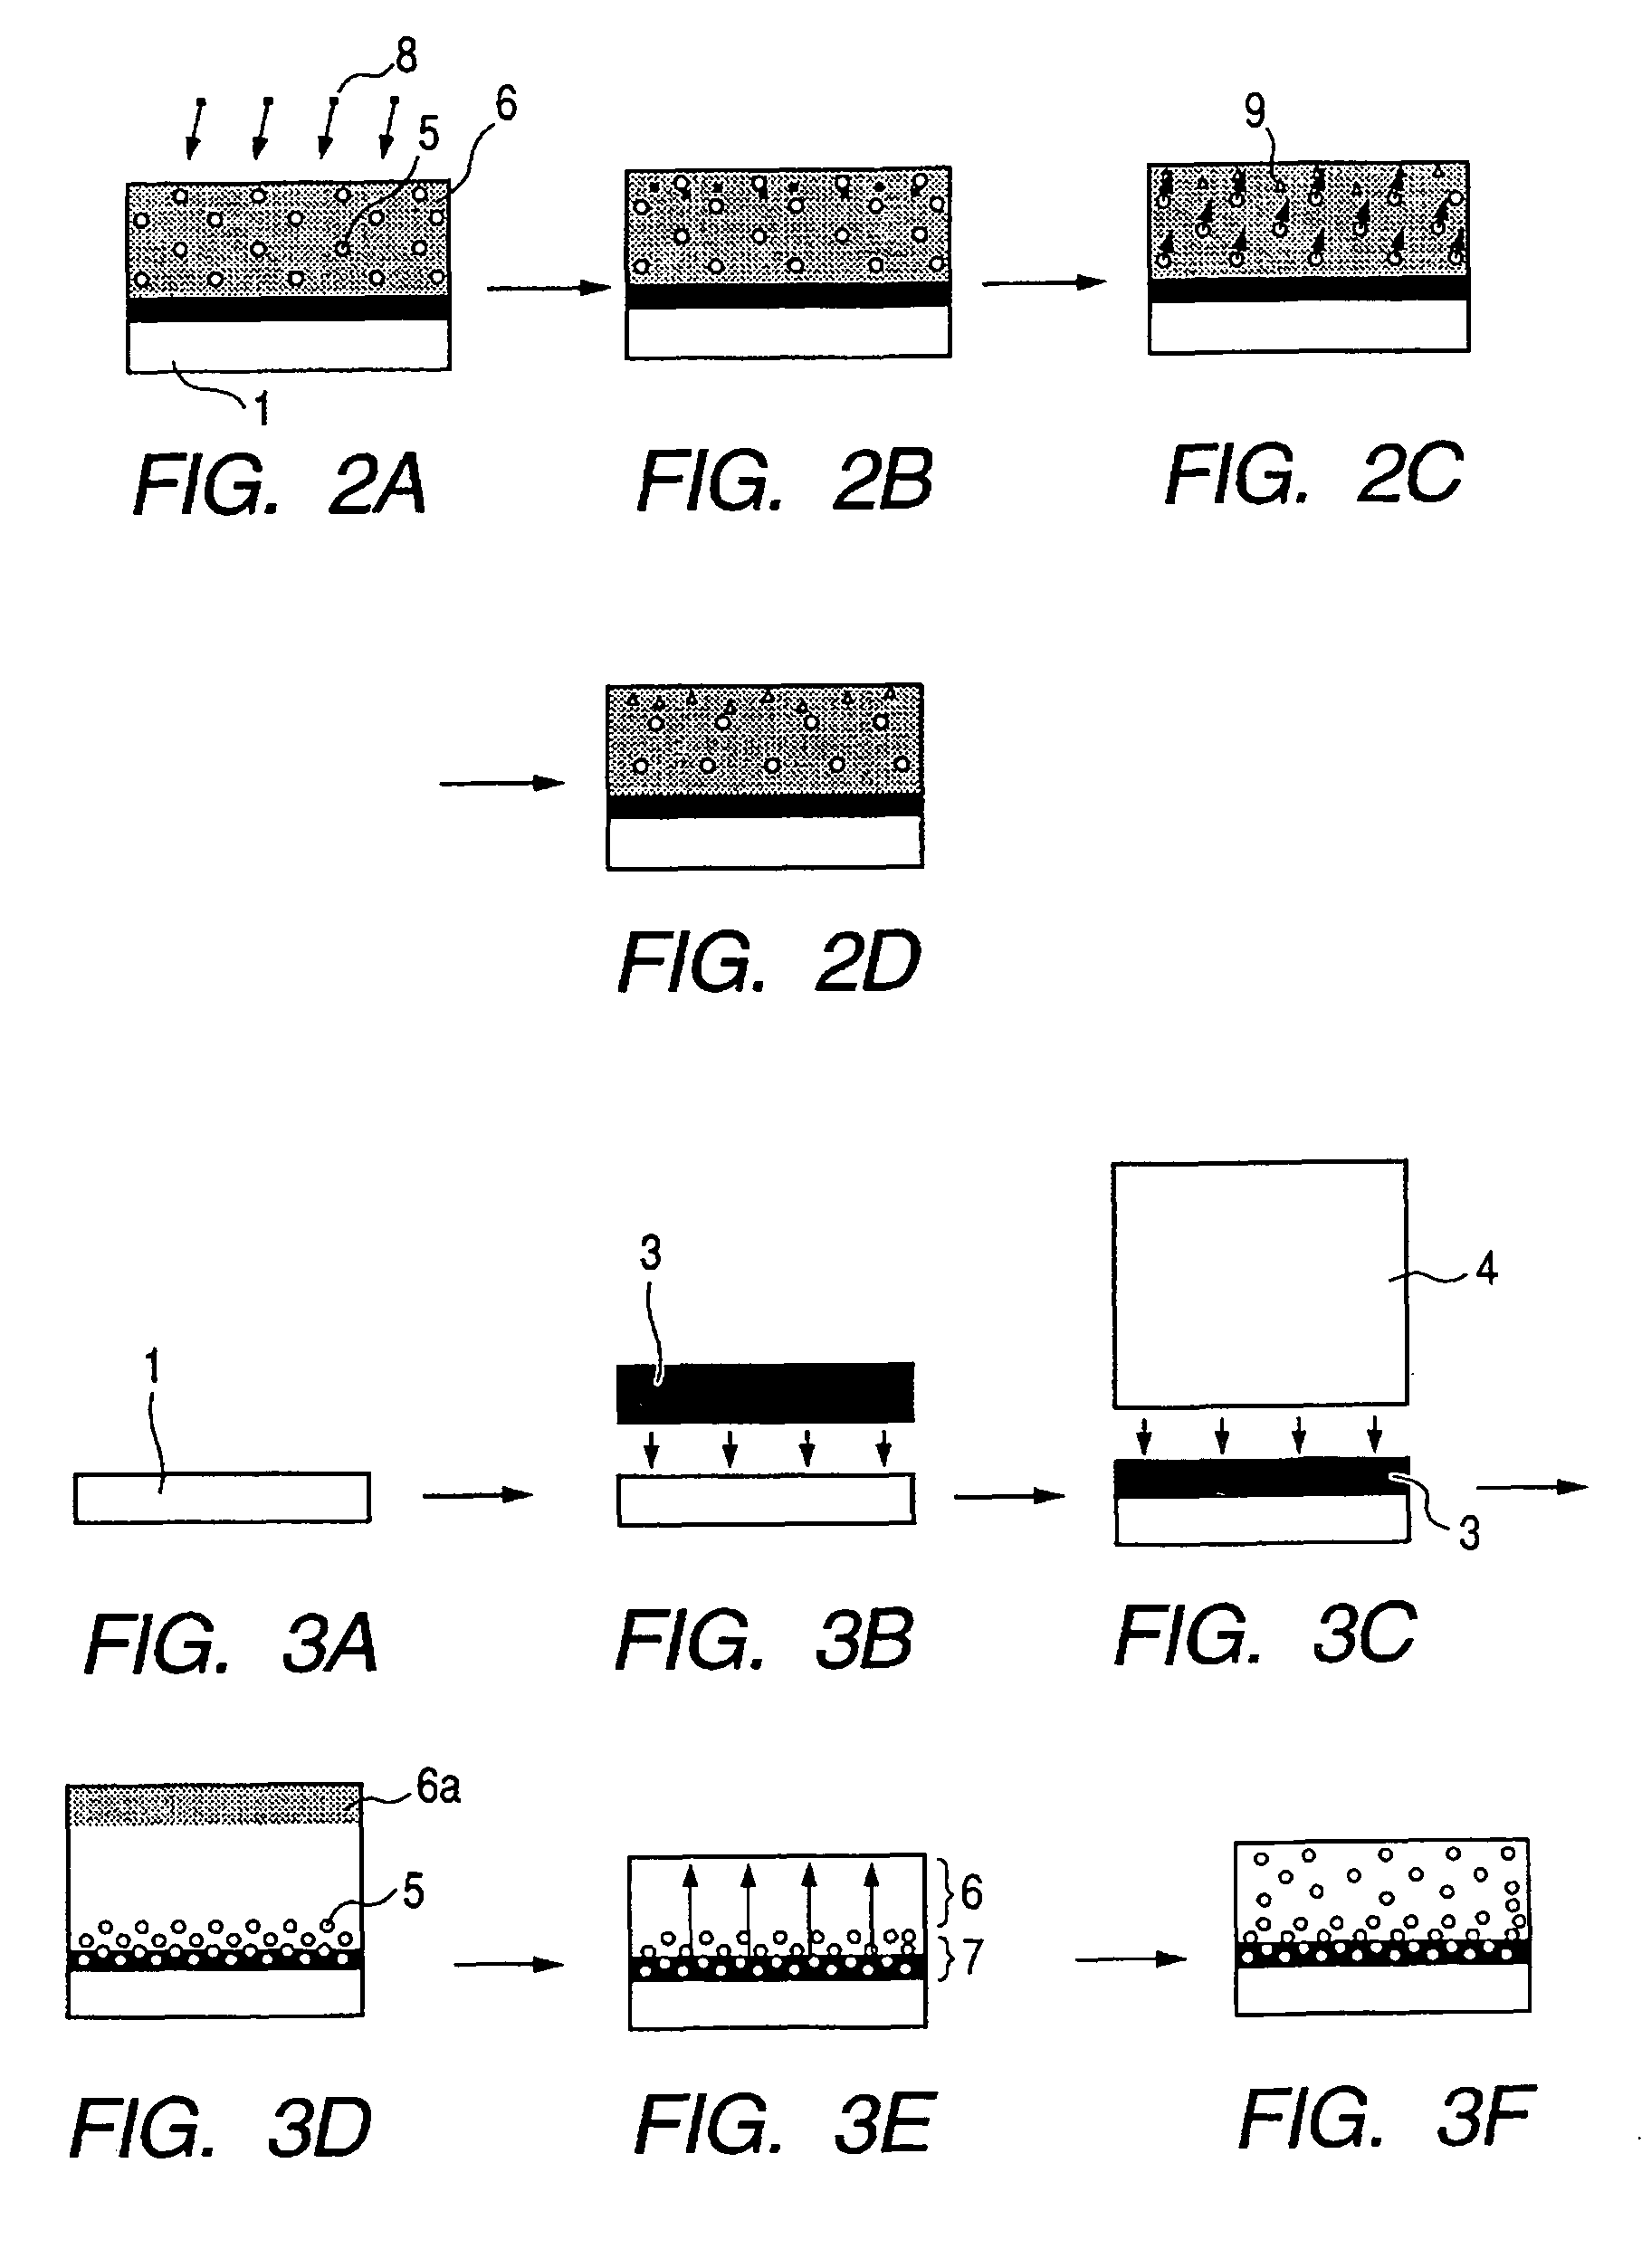 Article having microporous body part, production method of ink medium, diffusion method of sulfur-containing organic acid into microporous layer, production method of article having meicroporous body part, and inkjet recording medium produced therefrom